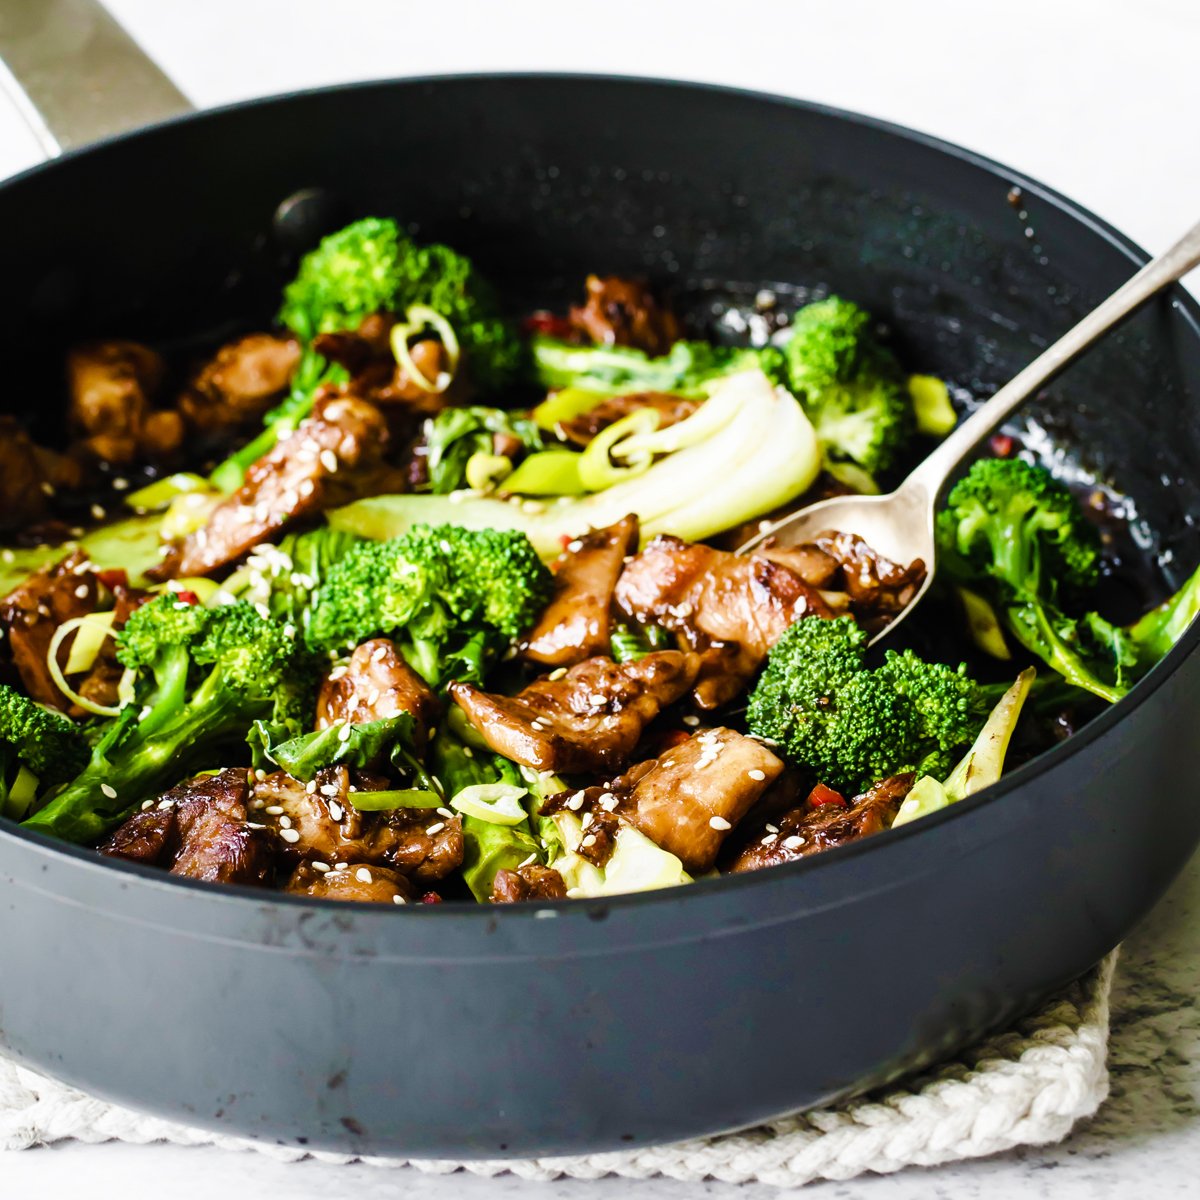 Teriyaki chicken with broccoli in a pan.